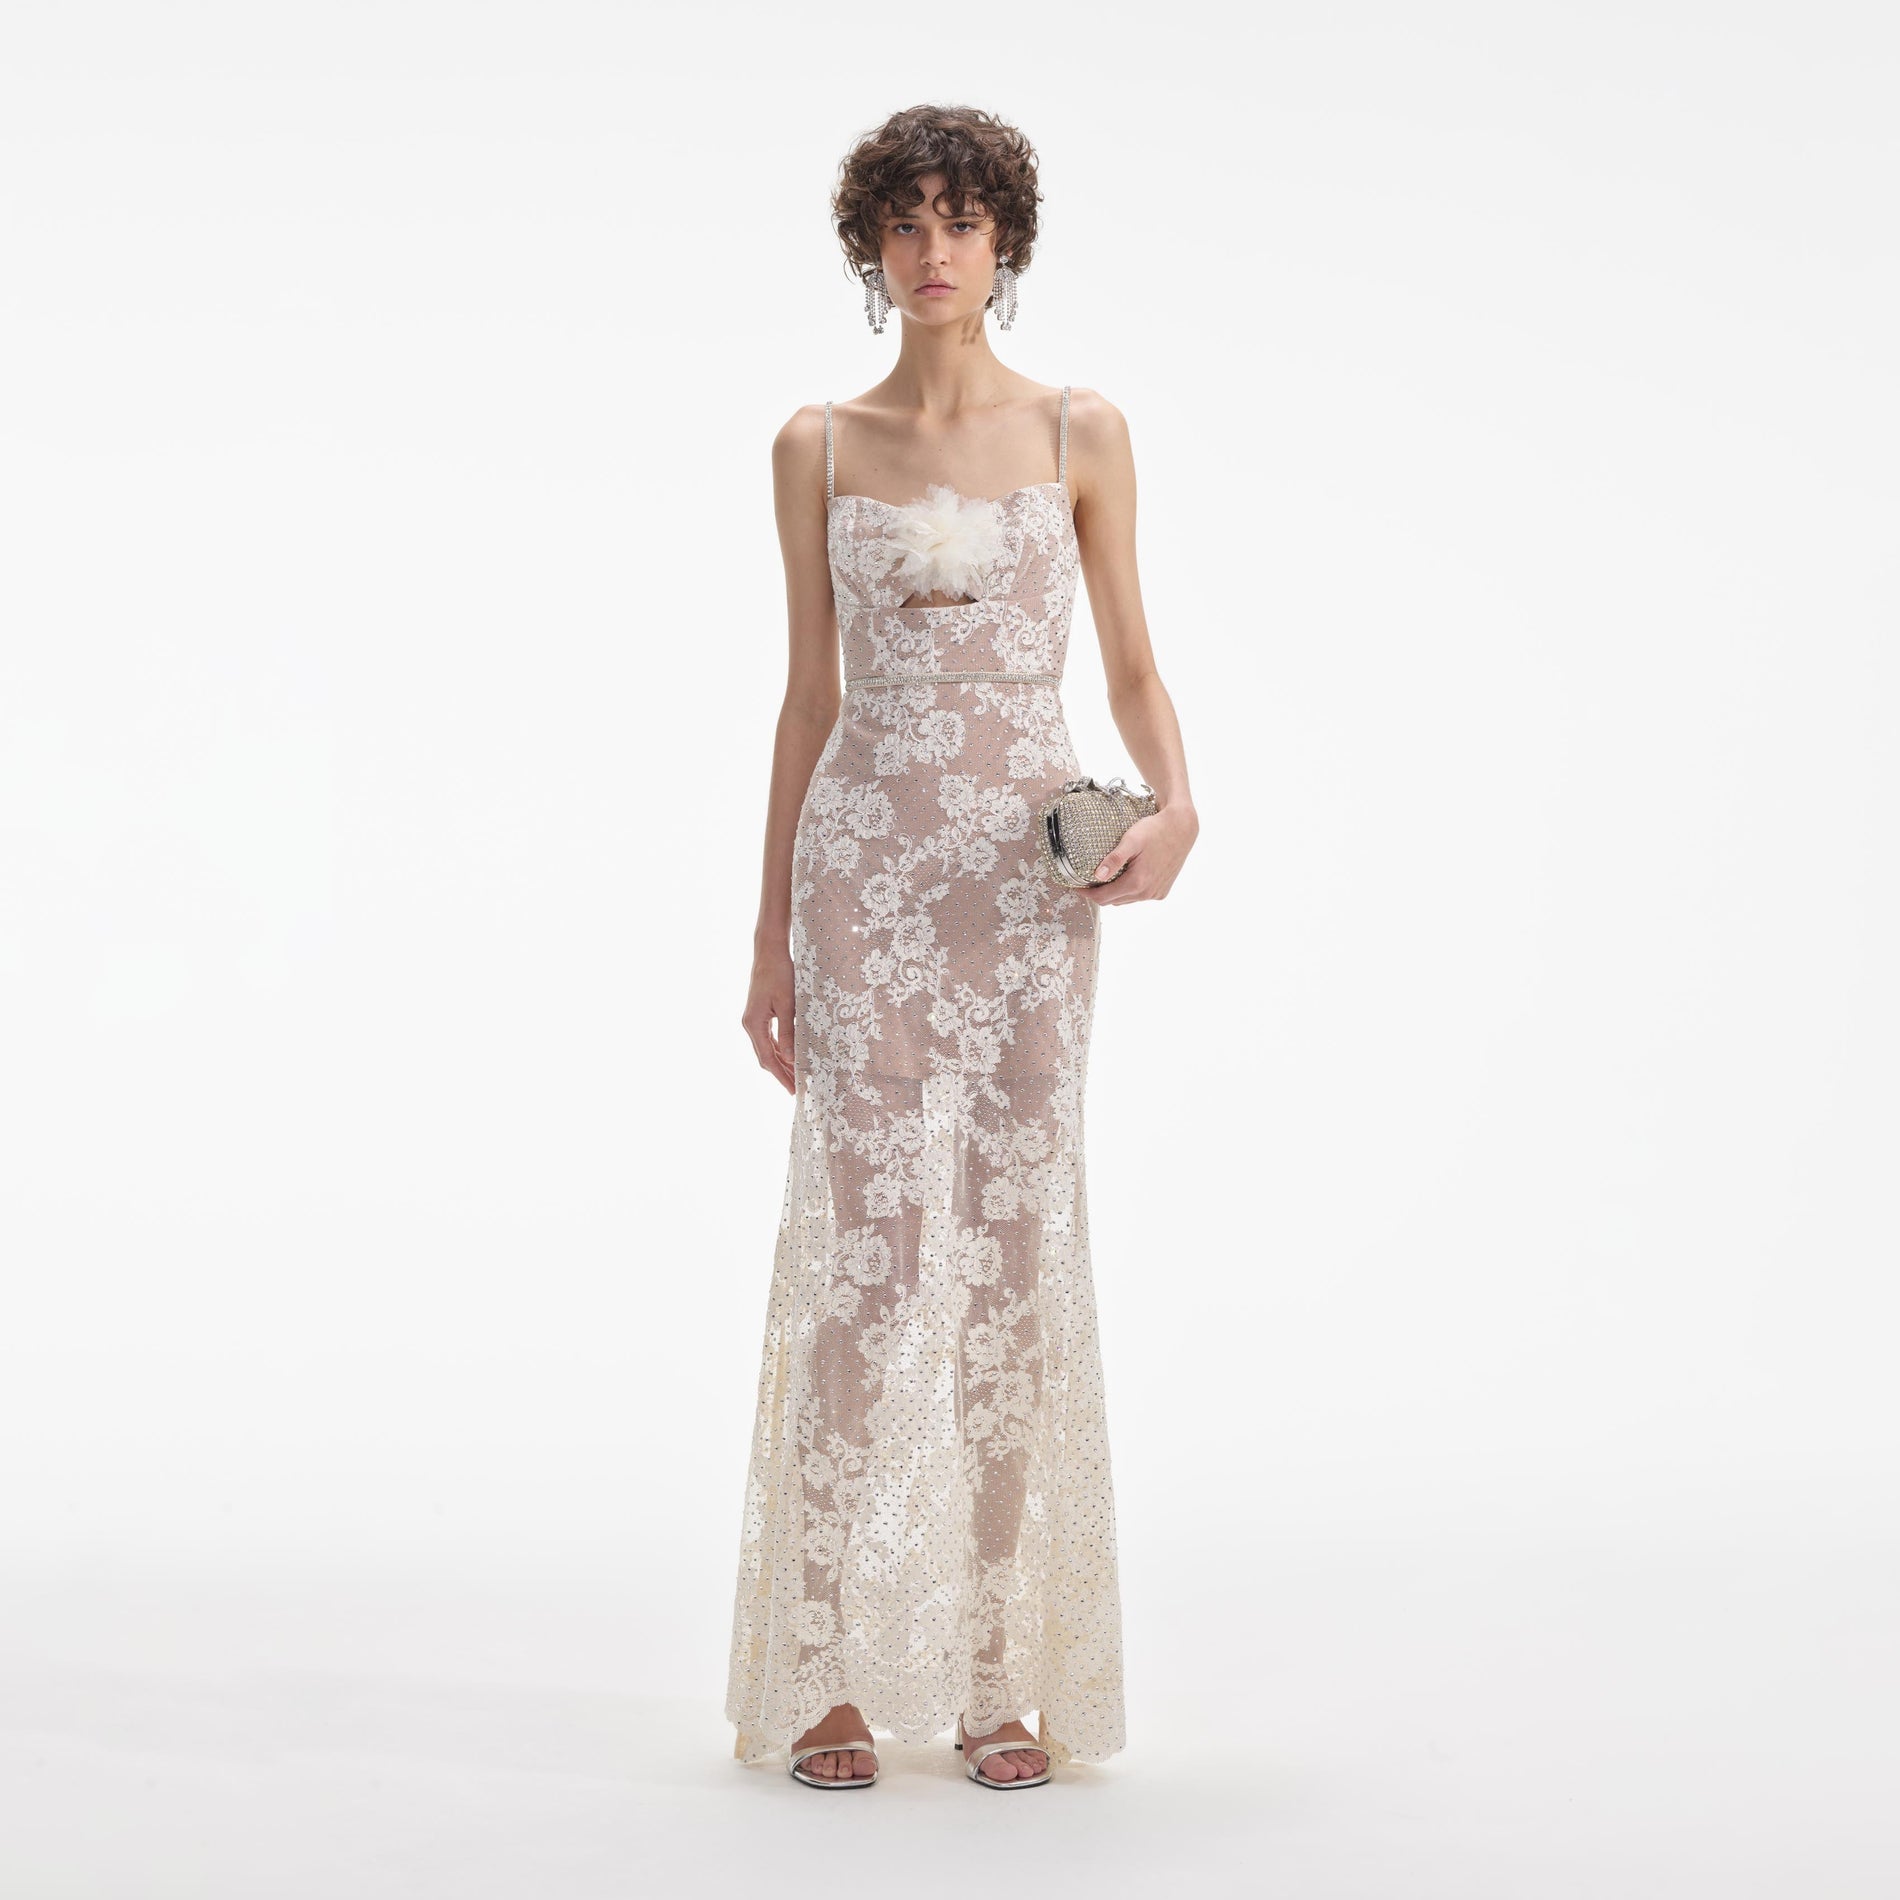 Front view of a woman wearing the Cream Rhinestone Lace Maxi Dress